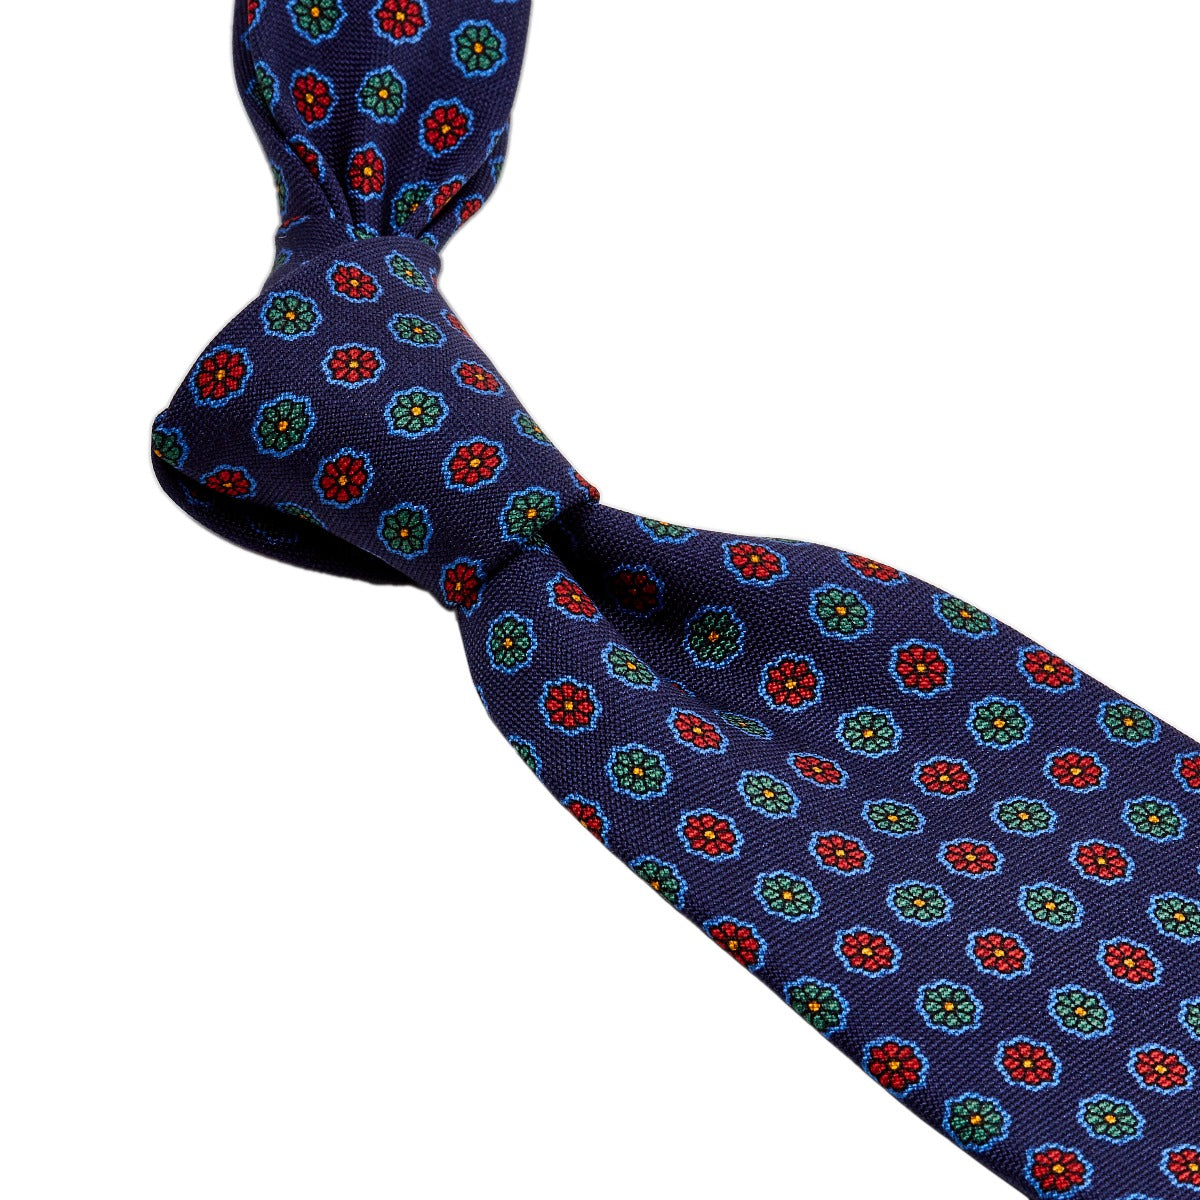 A Sovereign Grade Red Floral 25 oz Hopsack Silk Tie with colorful circles from KirbyAllison.com.